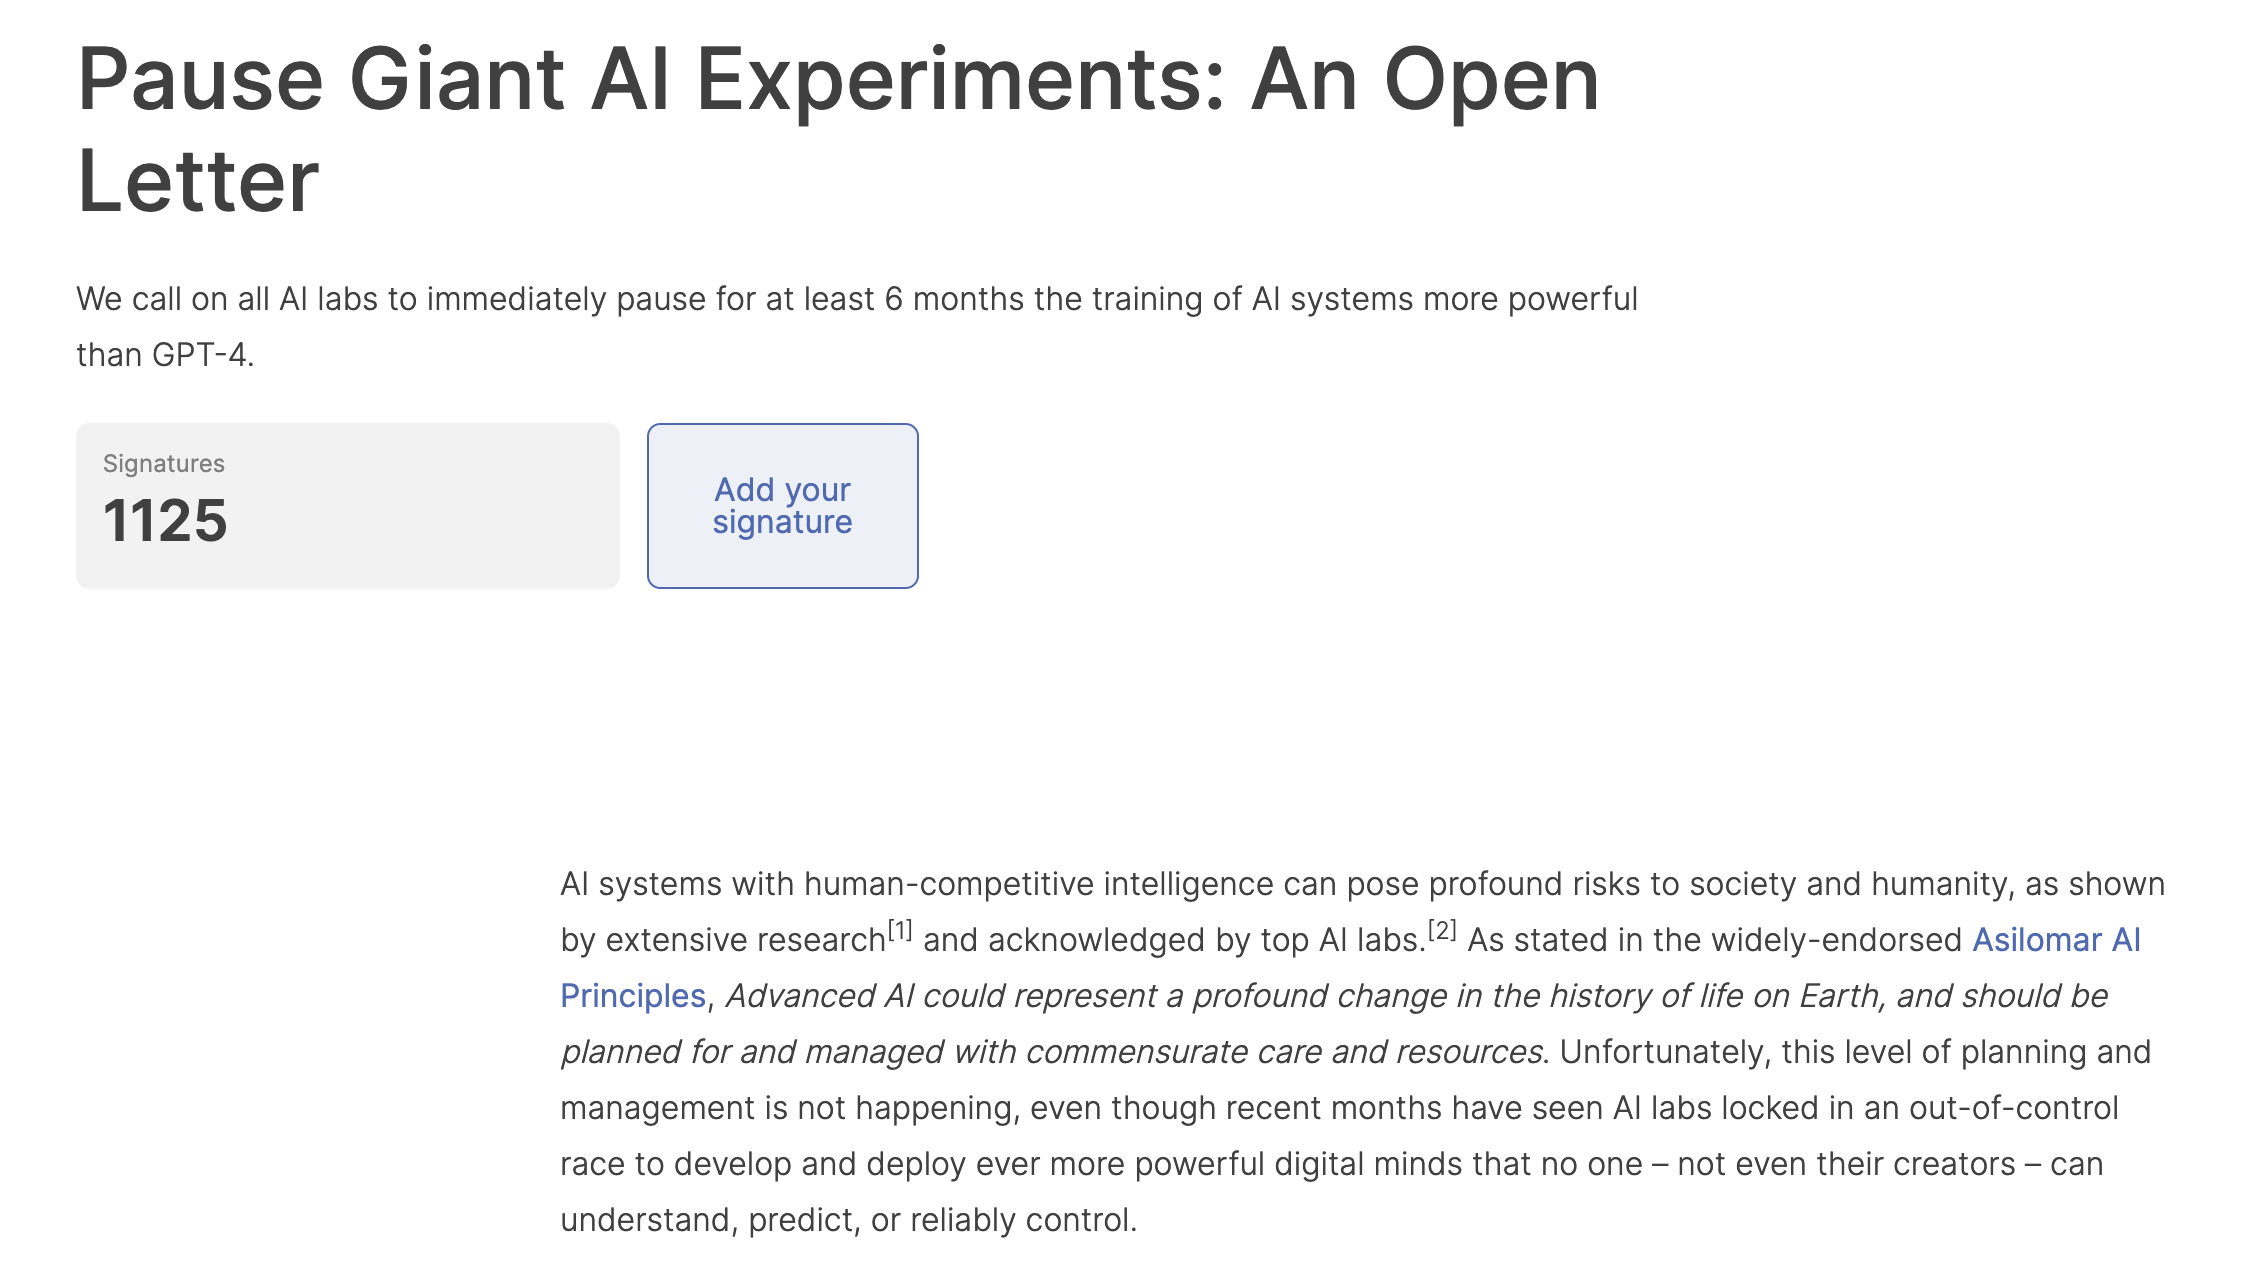 Experts call to pause training AI models more powerful than GPT-4